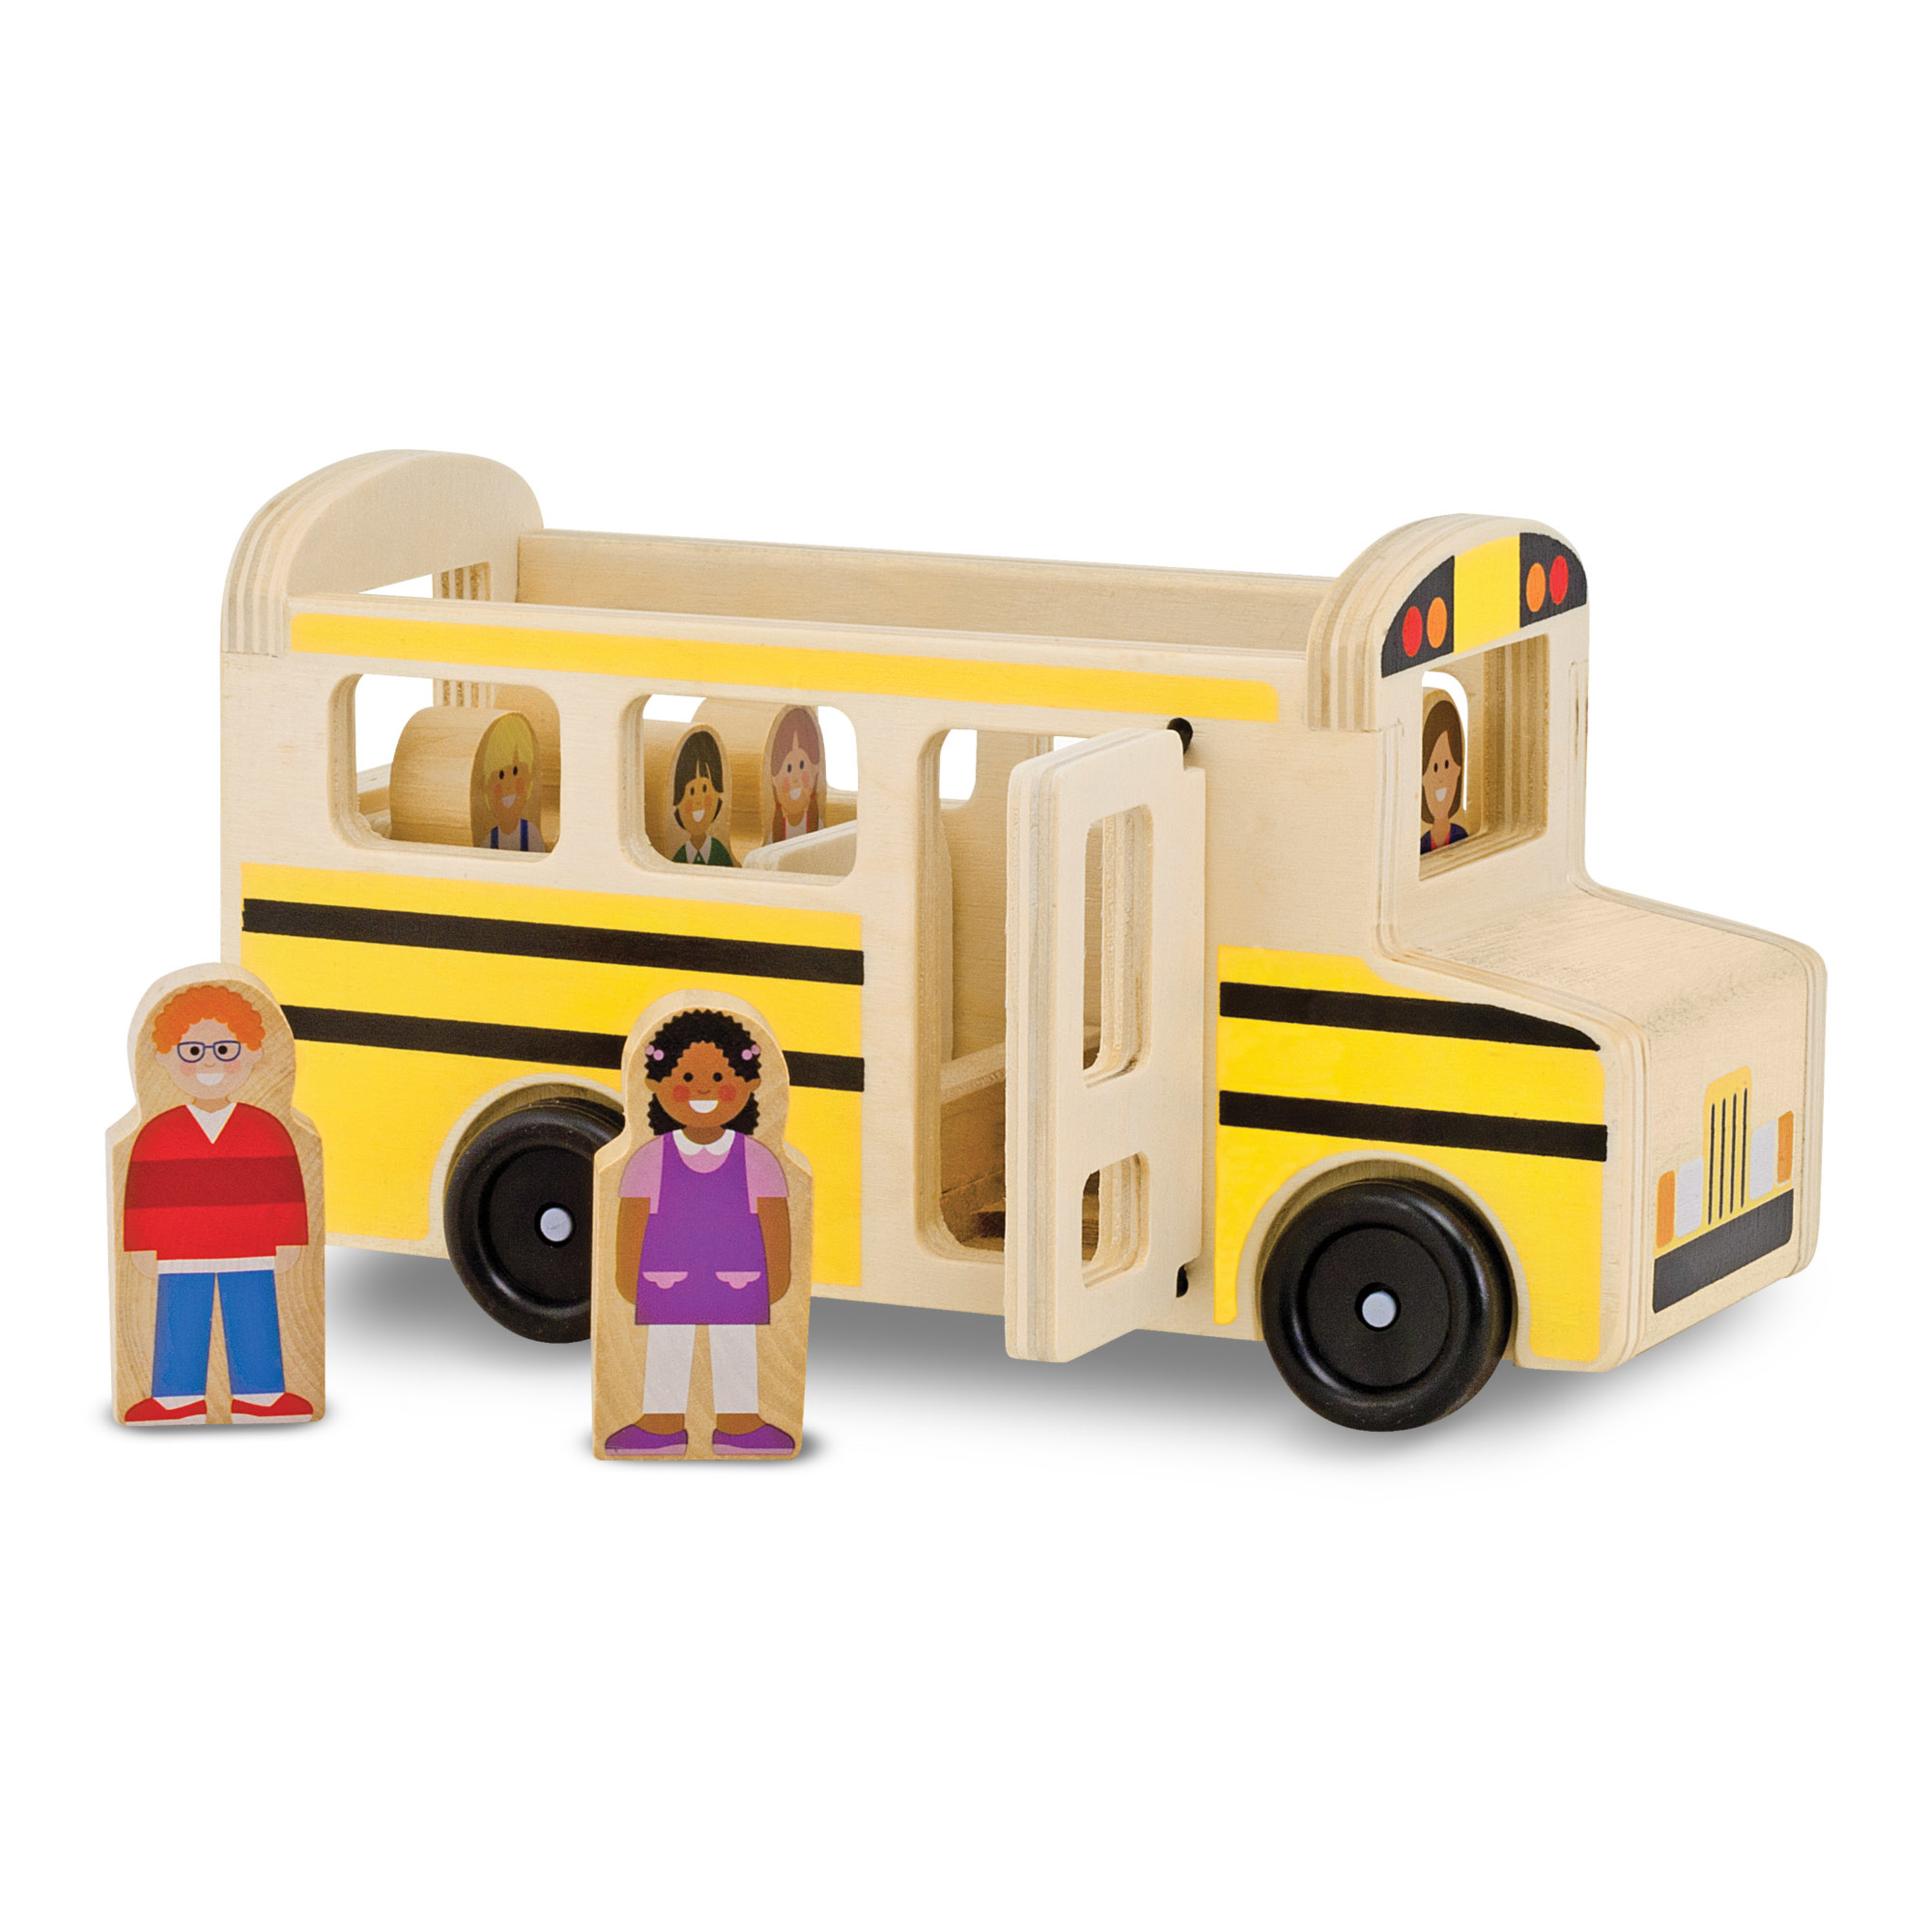 Melissa & Doug School Bus Wooden Play Set With 7 Play Figures - image 4 of 9